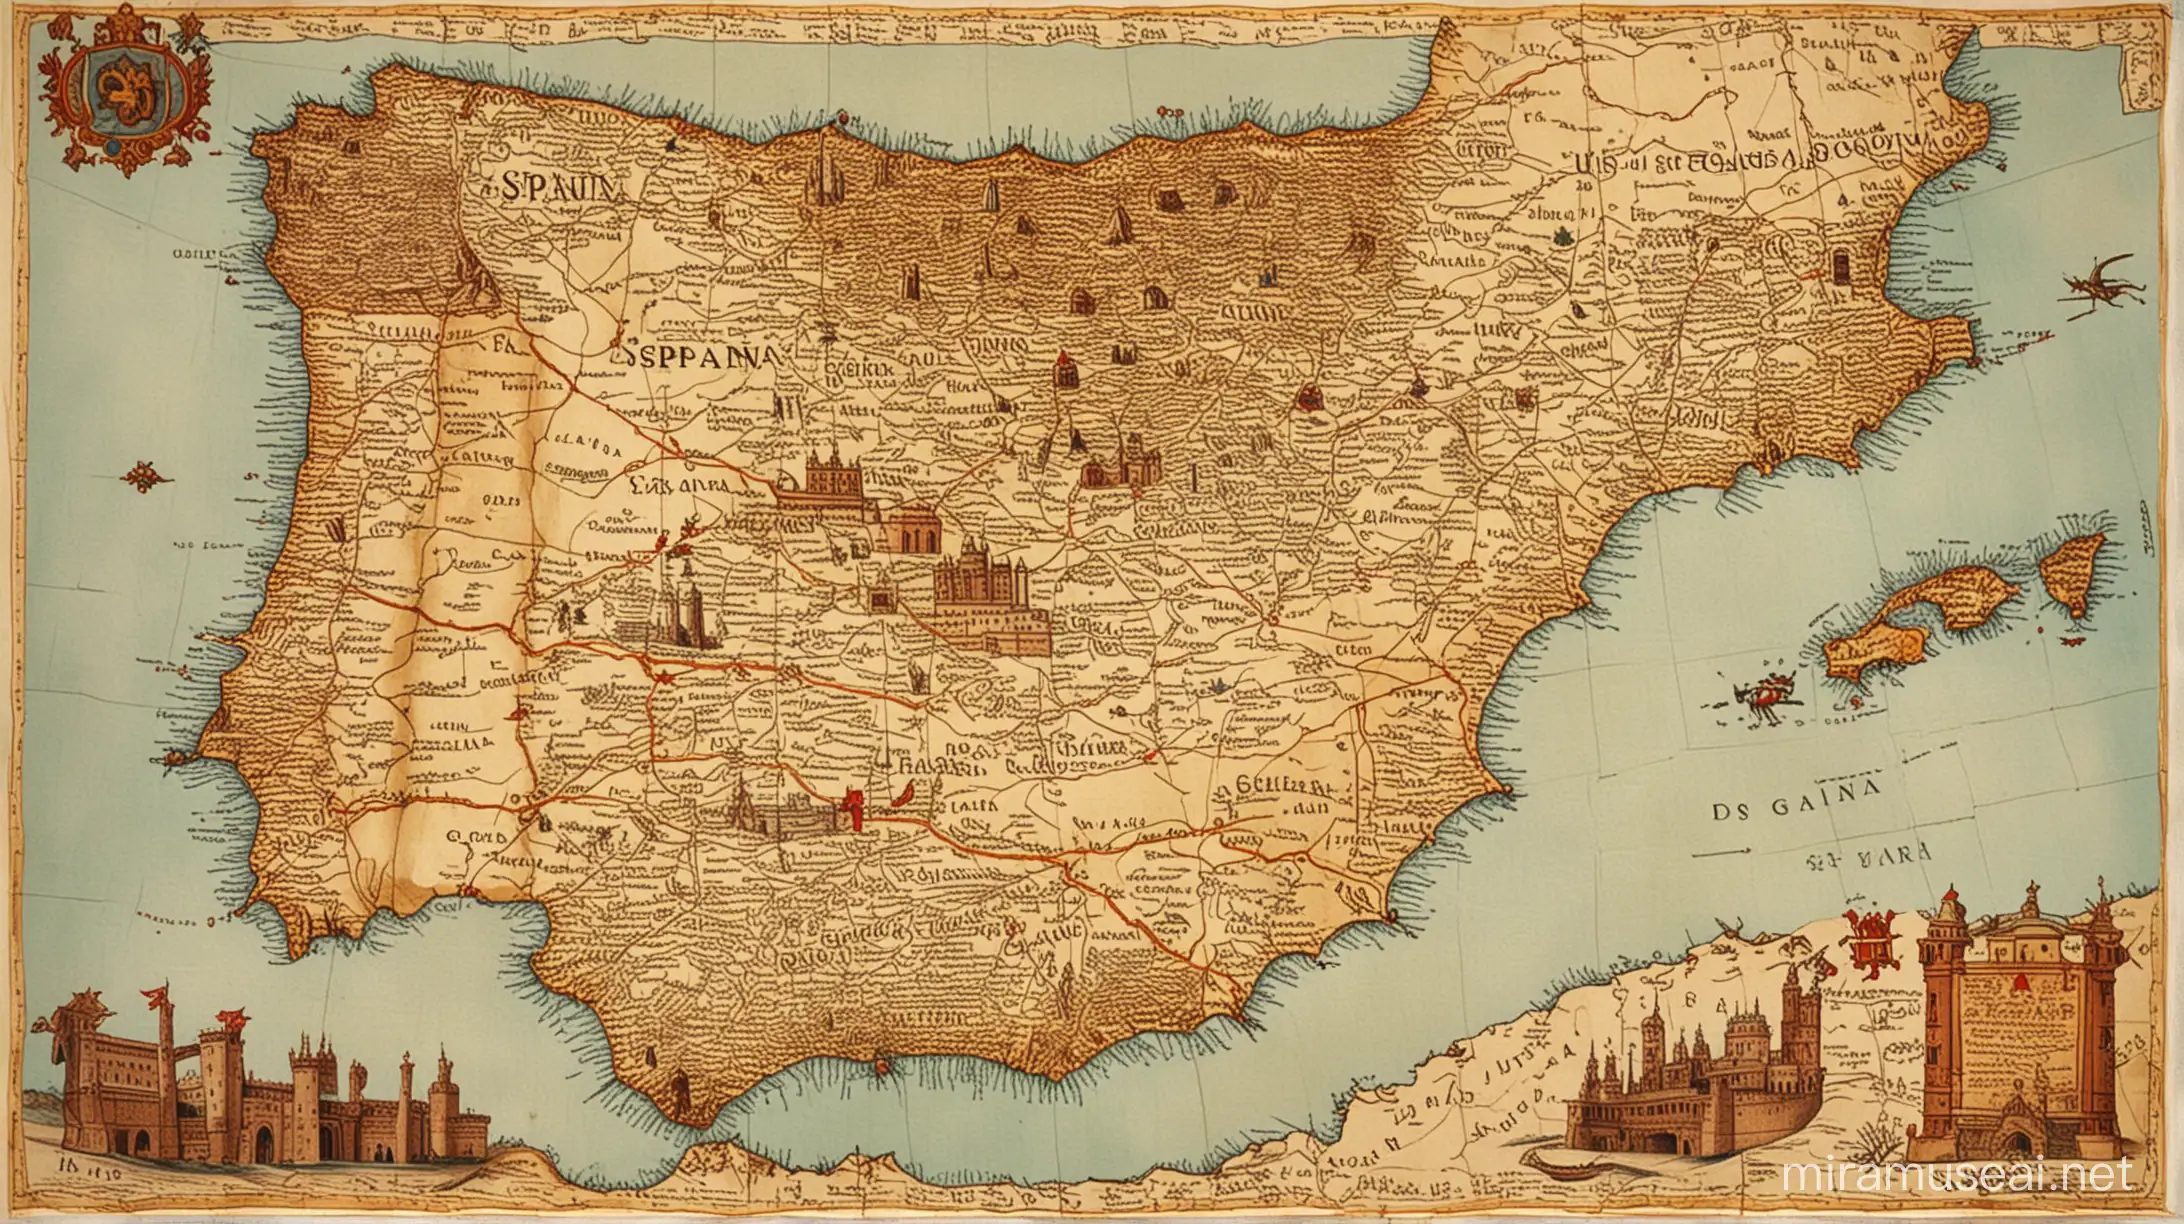 Paper map of Spain in the 1300s